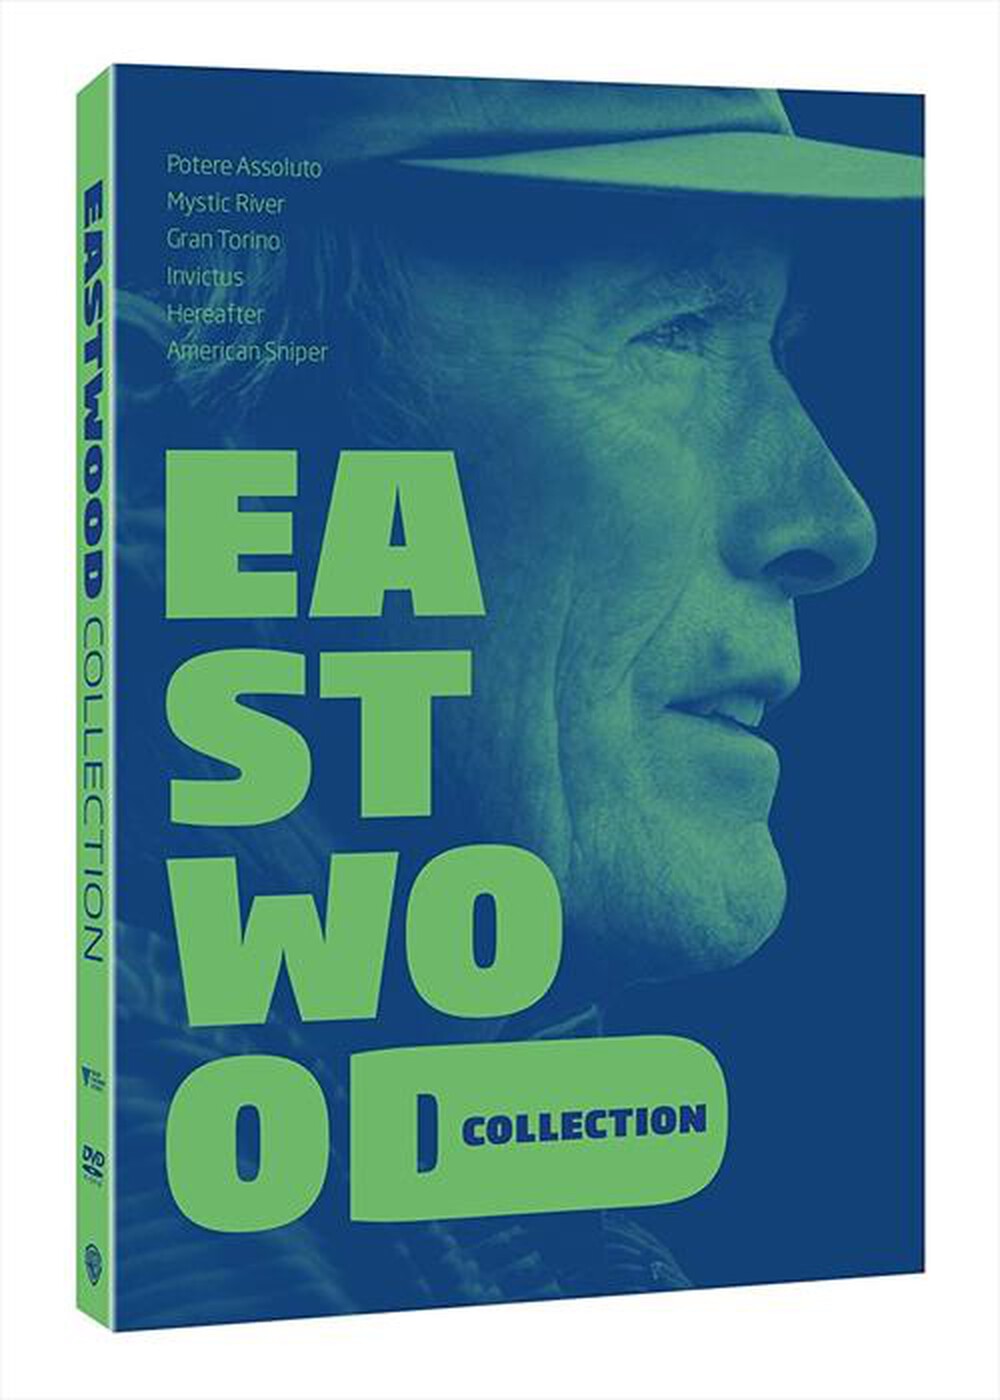 "WARNER HOME VIDEO - Clint Eastwood Collection (6 Dvd)"